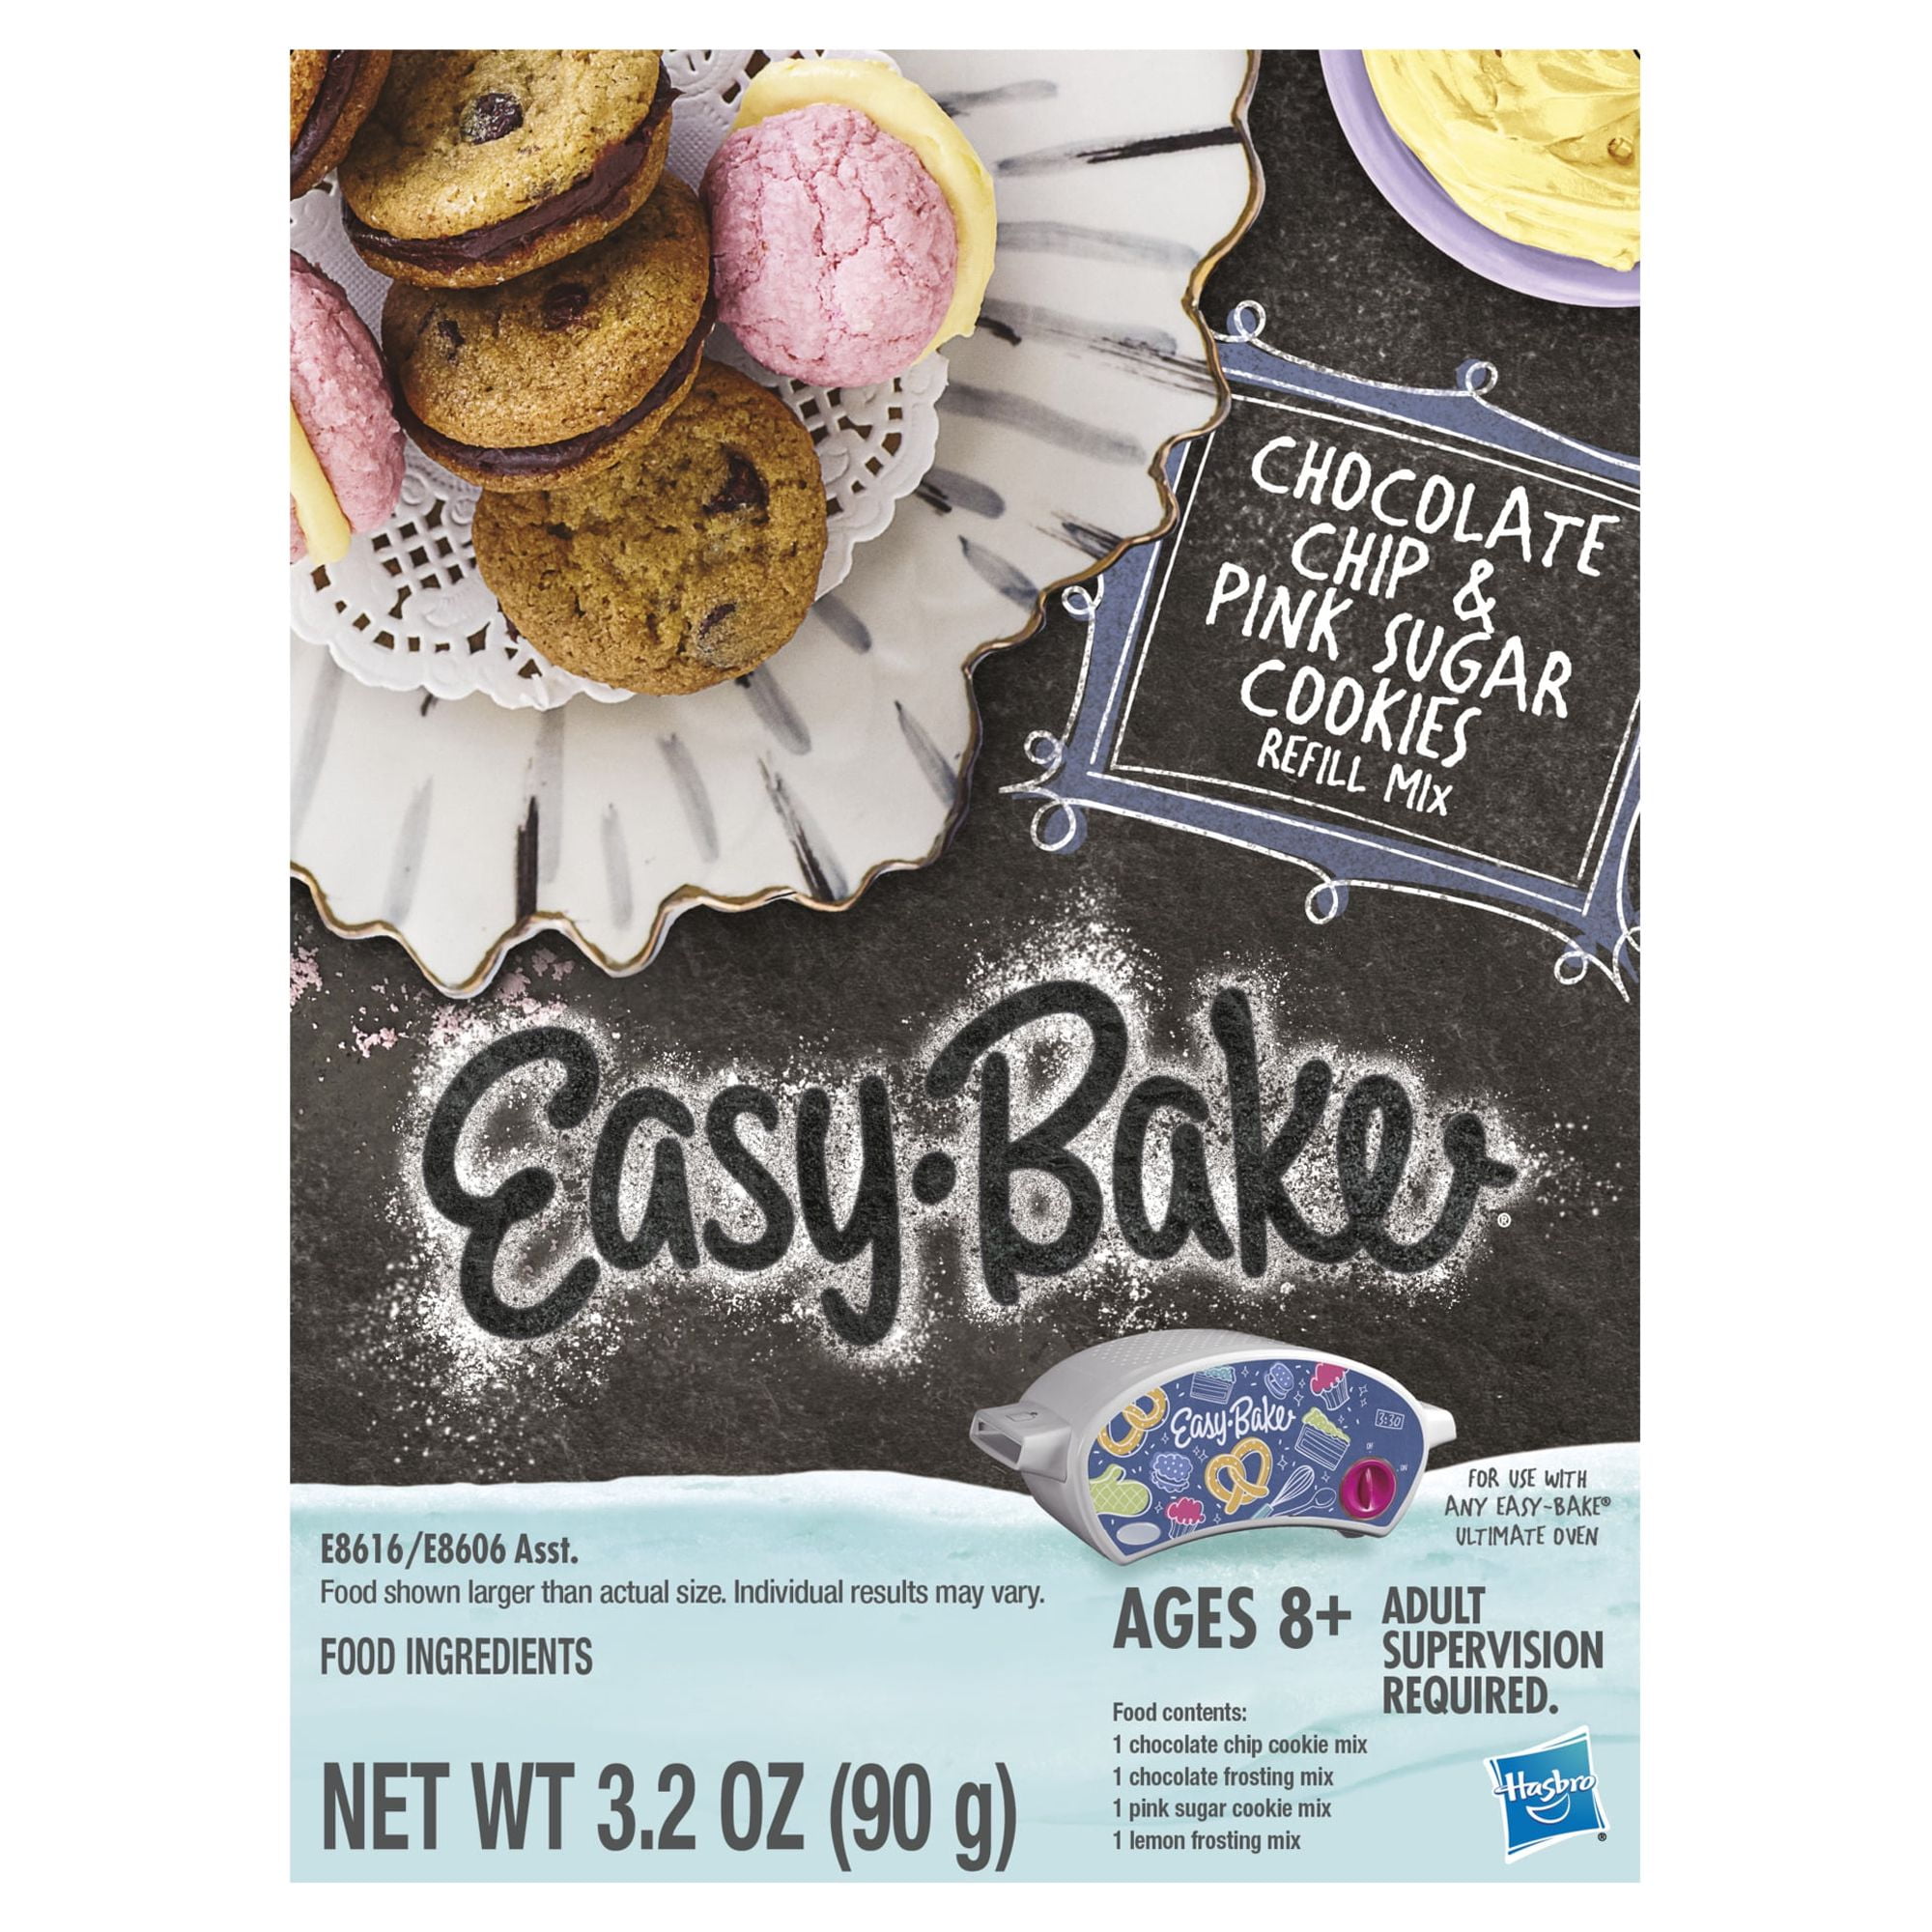 Make Easy Bake Oven Mixes For Just $0.12 Each! - Unsophisticook